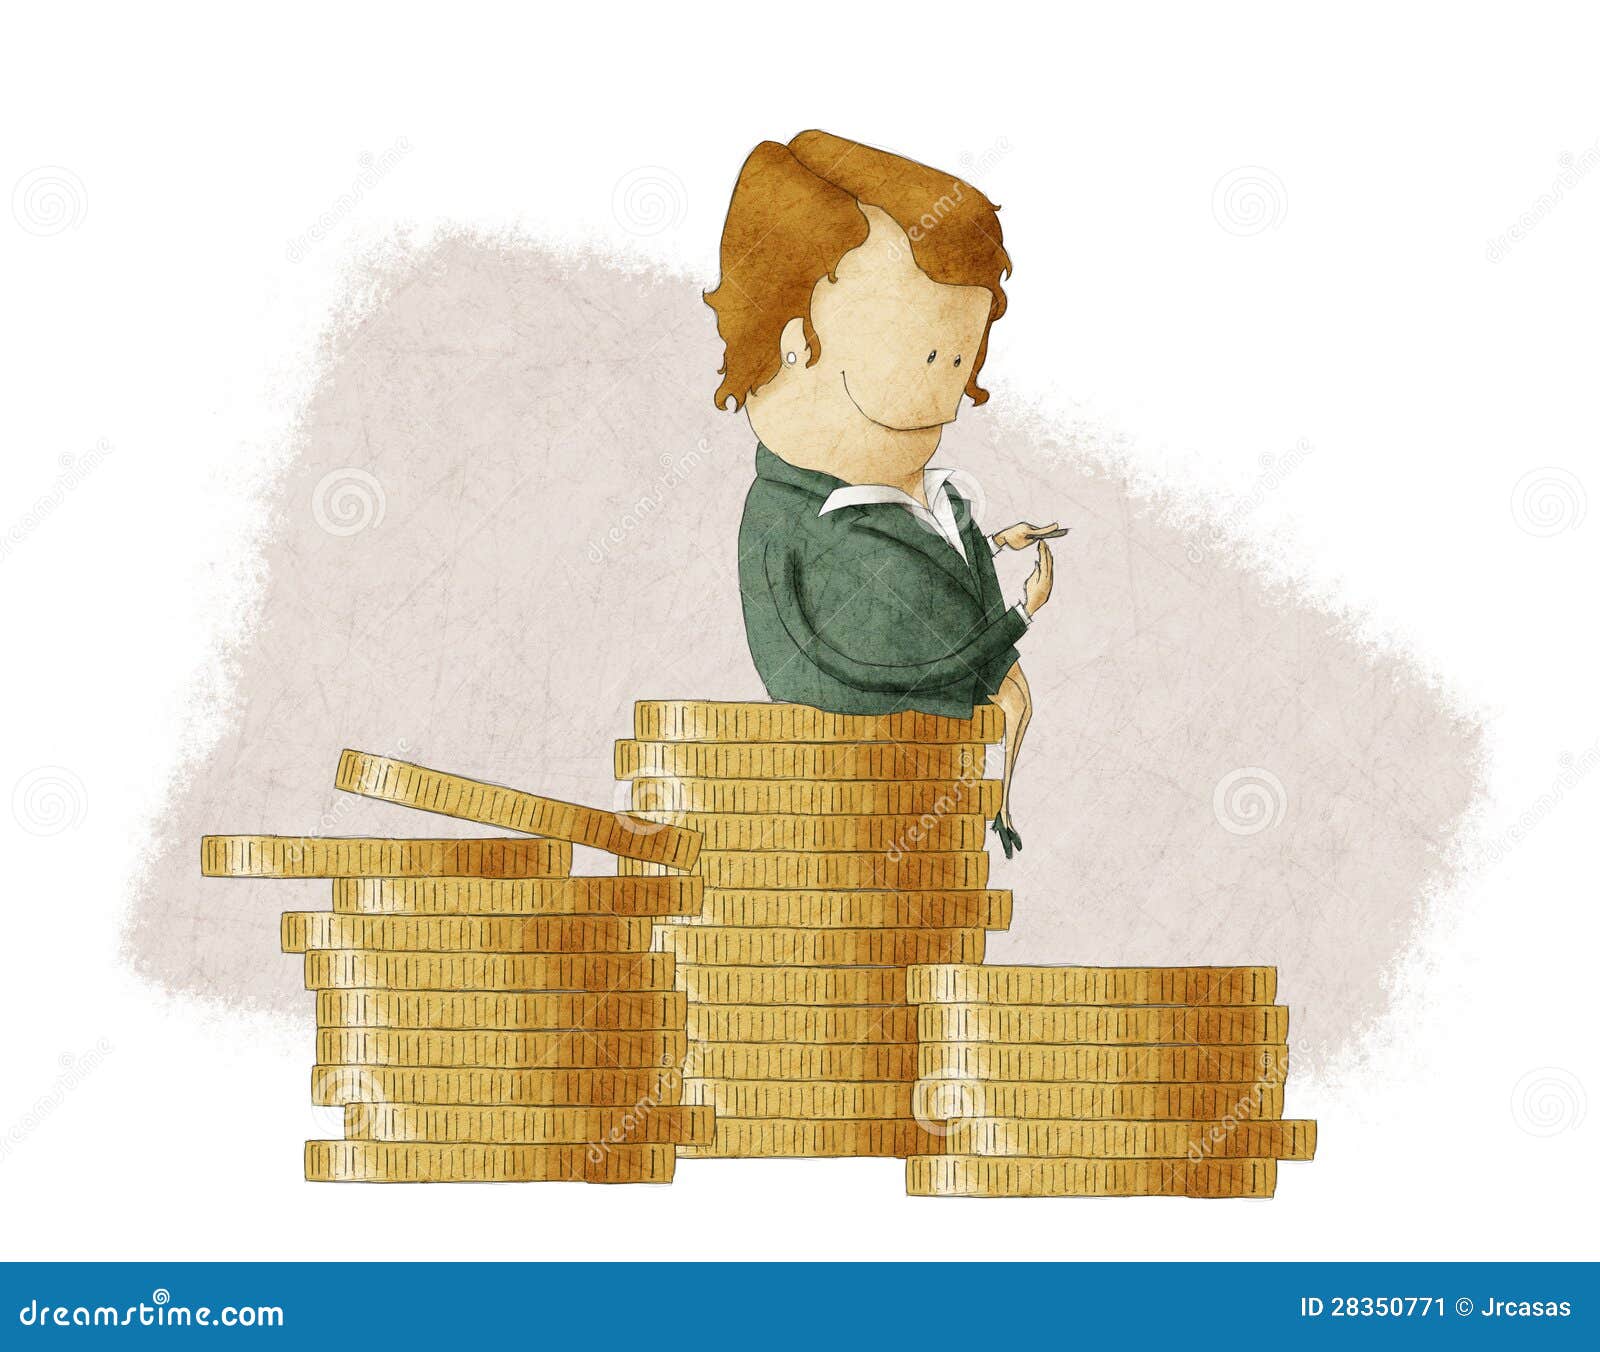 Rich Boss Sitting on Pile of Coins Stock Illustration - Illustration of coin: 28350771